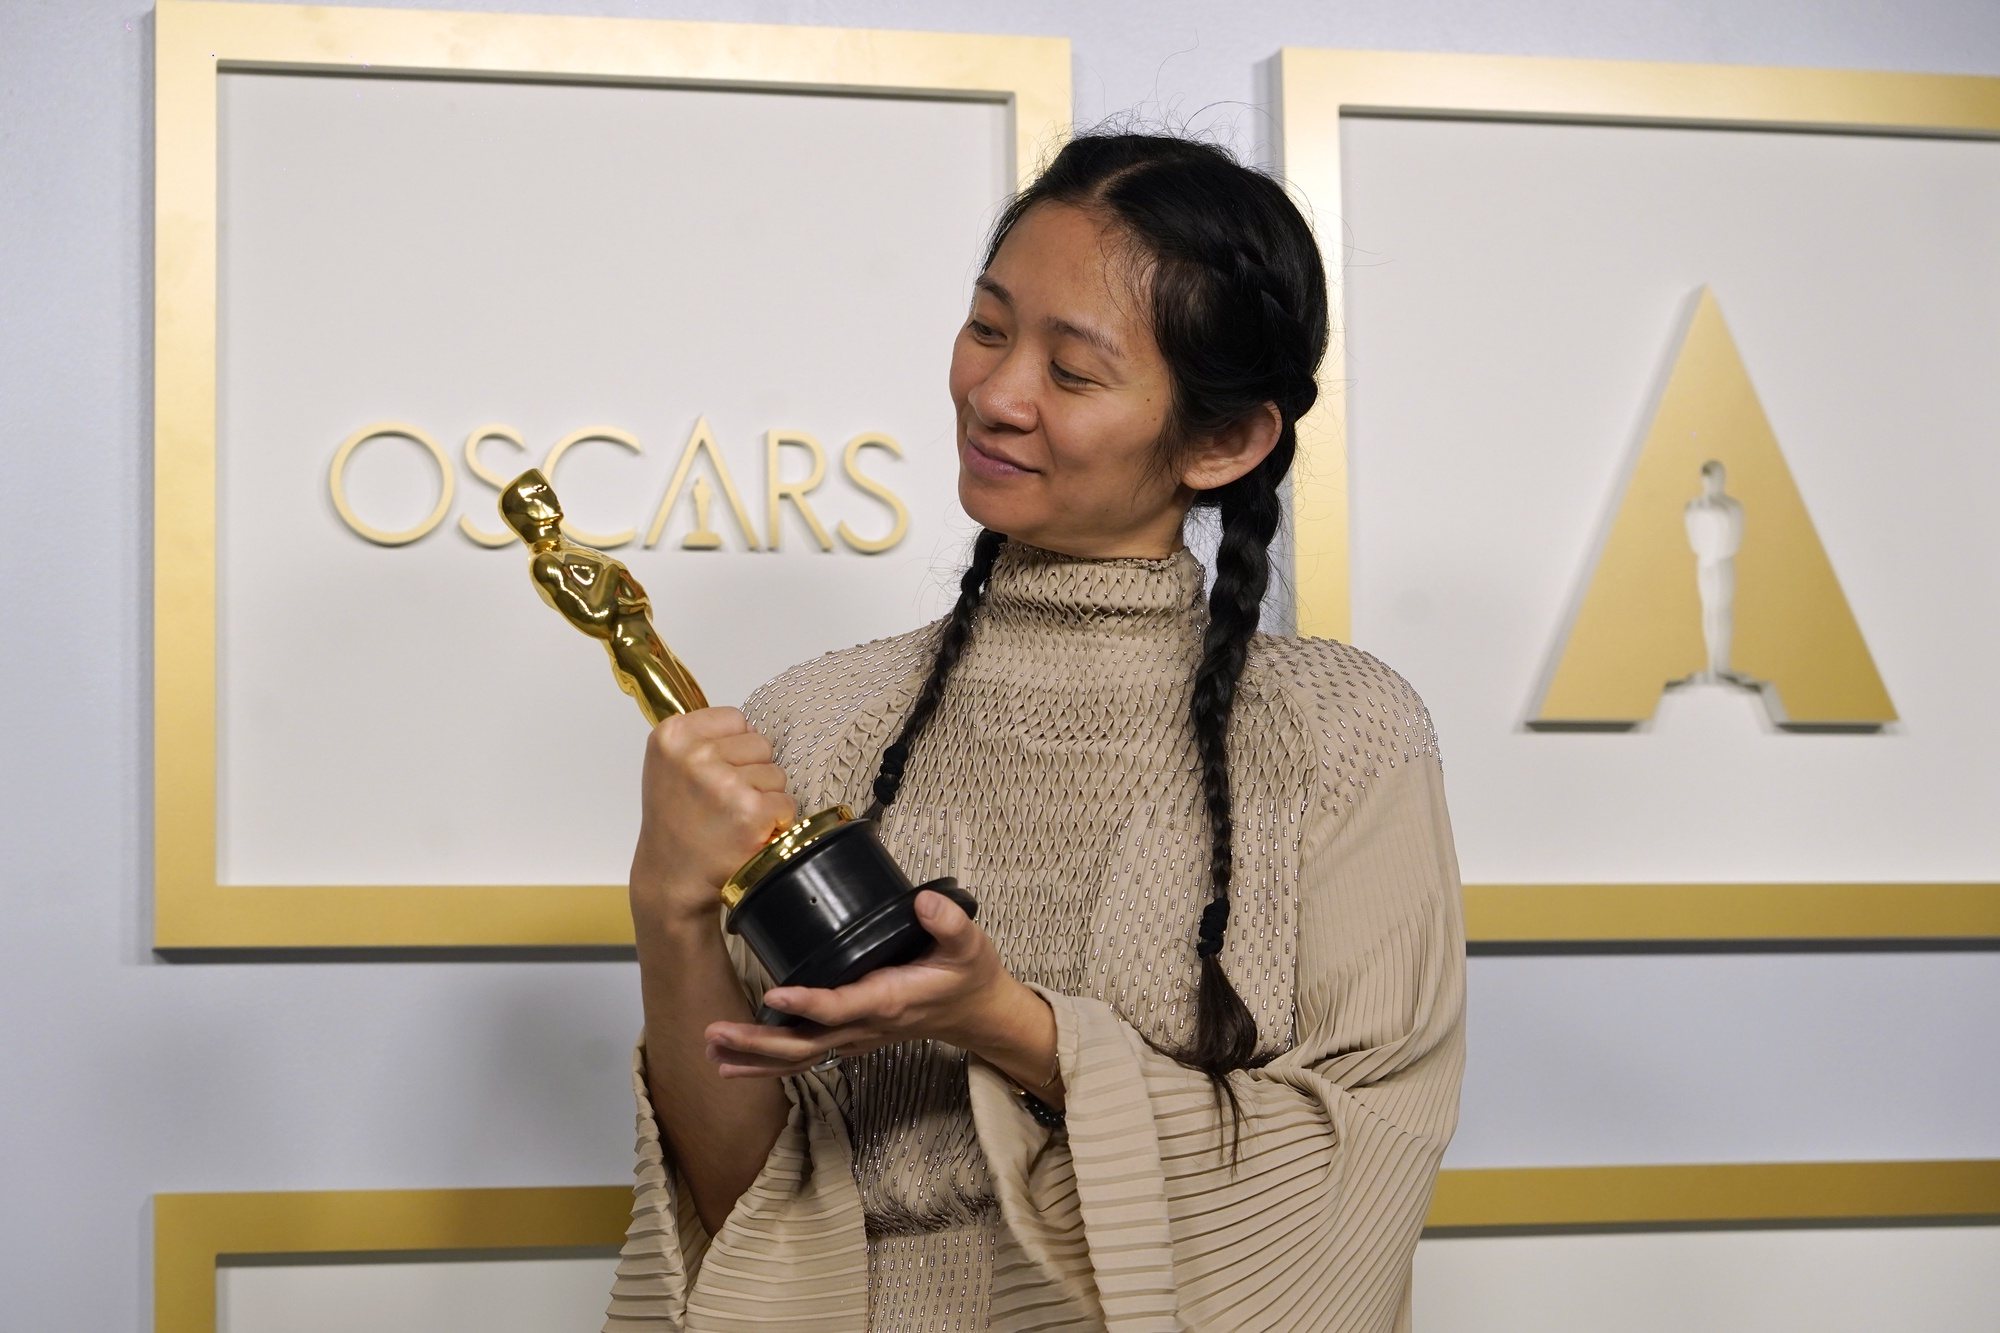 epa09161018 Director/Producer Chloe Zhao, winner of the award for best picture for &#039;Nomadland,&#039; poses in the press room at the 93rd annual Academy Awards ceremony at Union Station in Los Angeles, California, USA, 25 April 2021. The Oscars are presented for outstanding individual or collective efforts in filmmaking in 24 categories. The Oscars happen two months later than originally planned, due to the impact of the coronavirus COVID-19 pandemic on cinema.  EPA/Chris Pizzello / POOL *** Local Caption *** 55864152